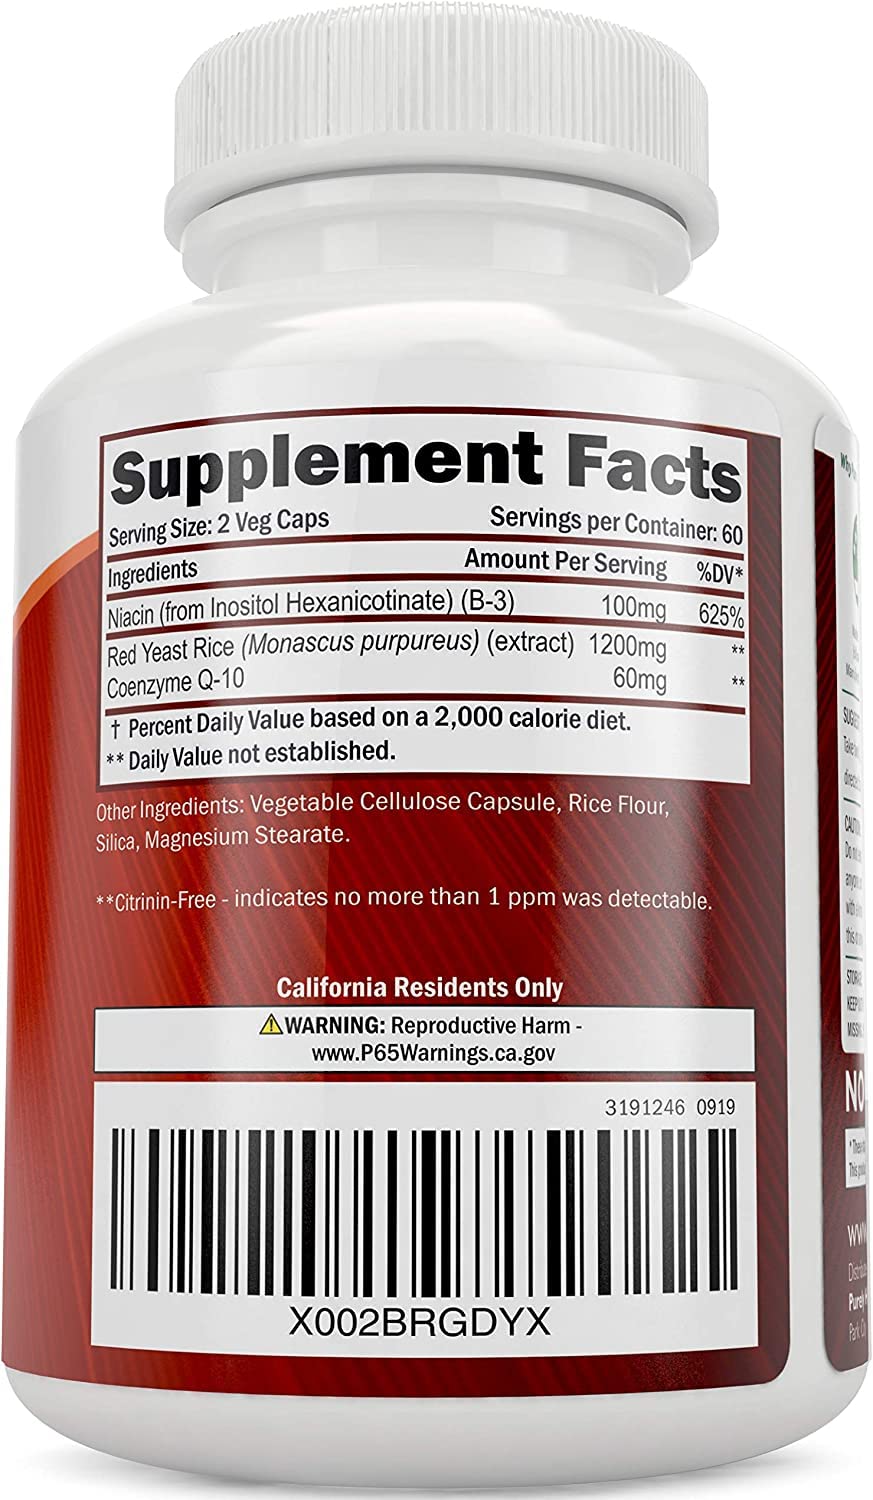 Purely Holistic Red Yeast Rice 1200mg with CoQ10 & Niacin + Magnesium Glycinate 400mg - 120 Capsules + 270 Tablets - Made in USA